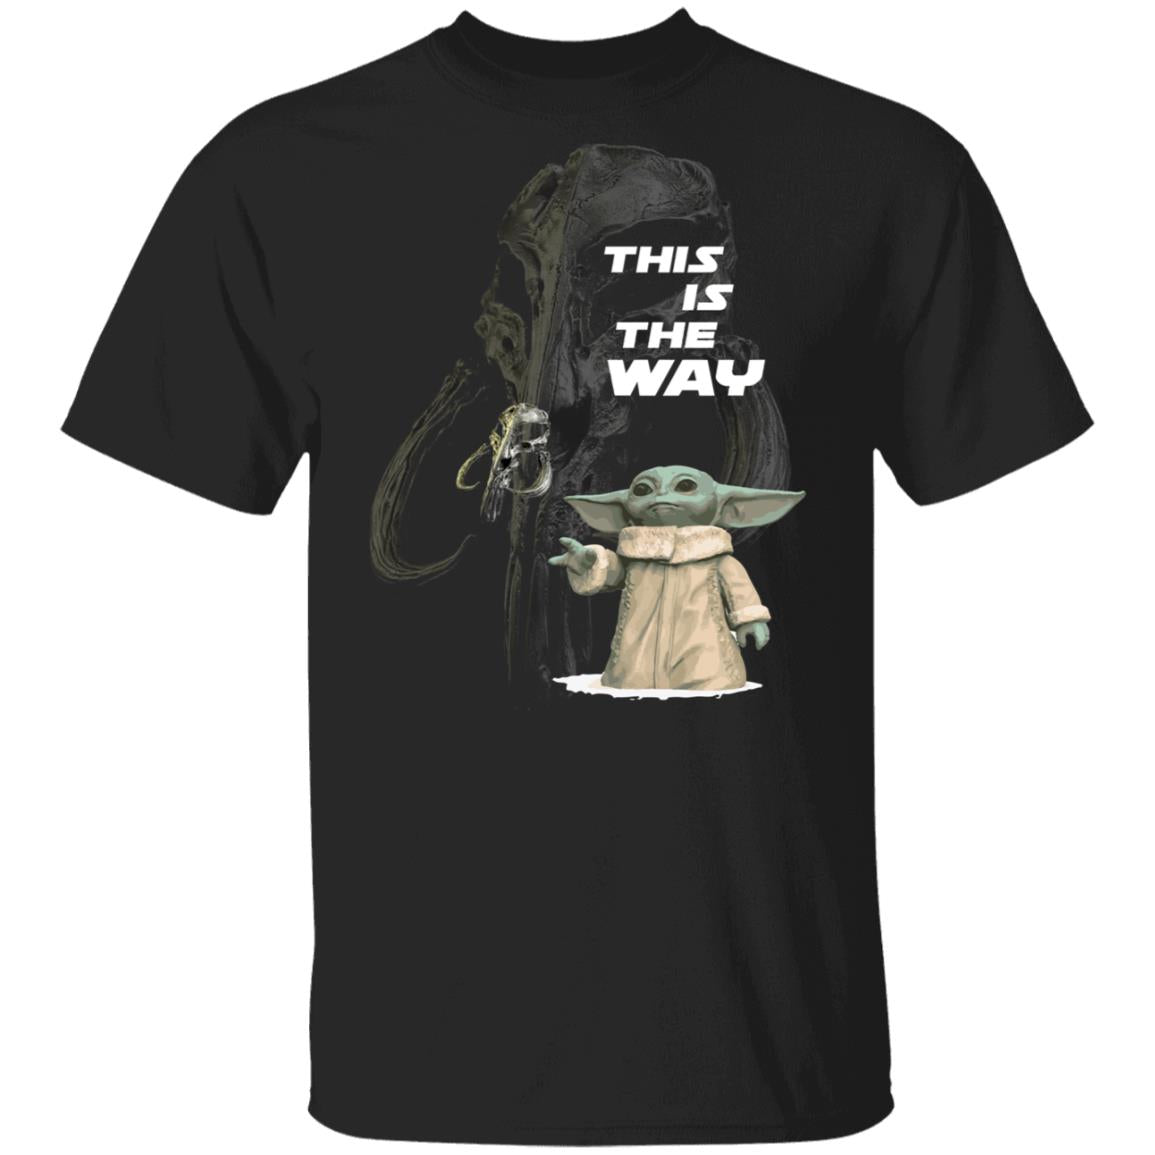 This is the way v1 Child T-Shirt